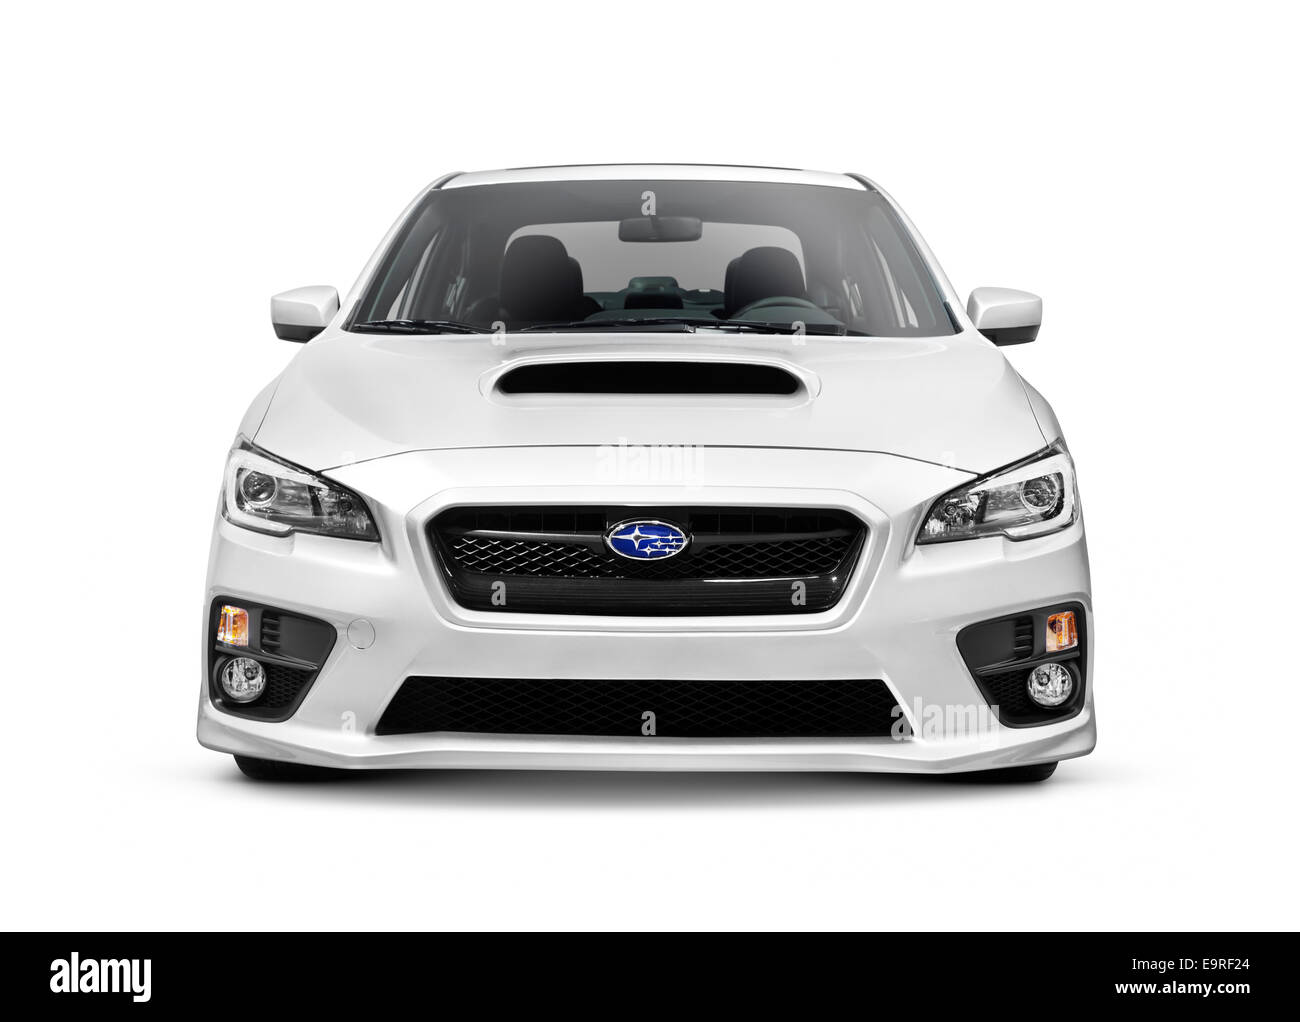 Silver 2015 Subaru Impreza WRX compact car isolated on white background with clipping path Stock Photo